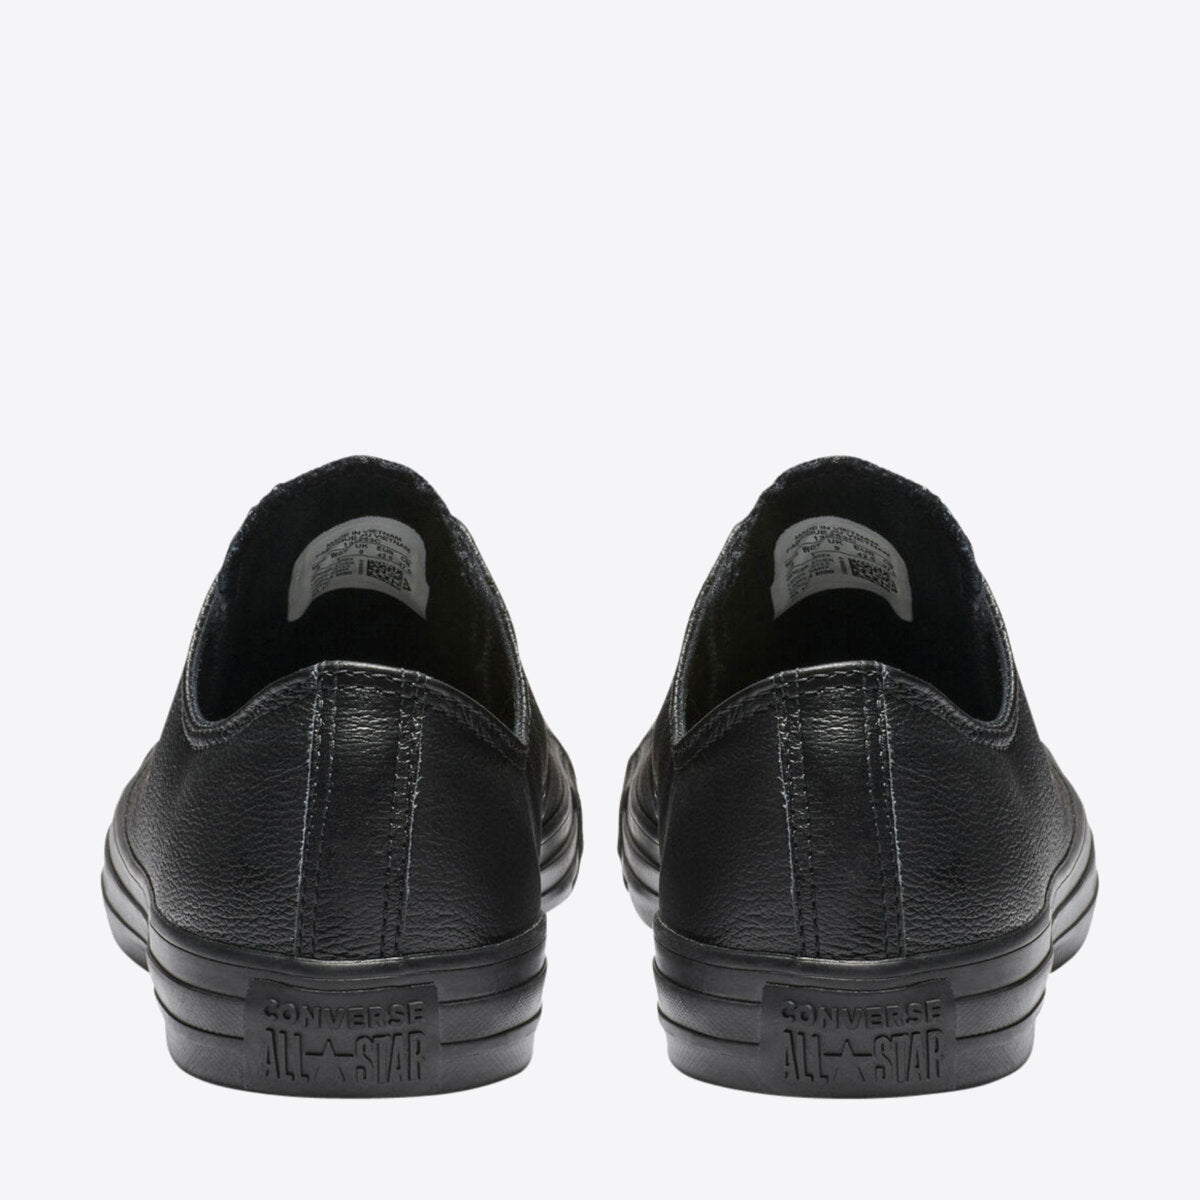 CONVERSE Chuck Taylor All Star Leather Low Black Mono - Image 6